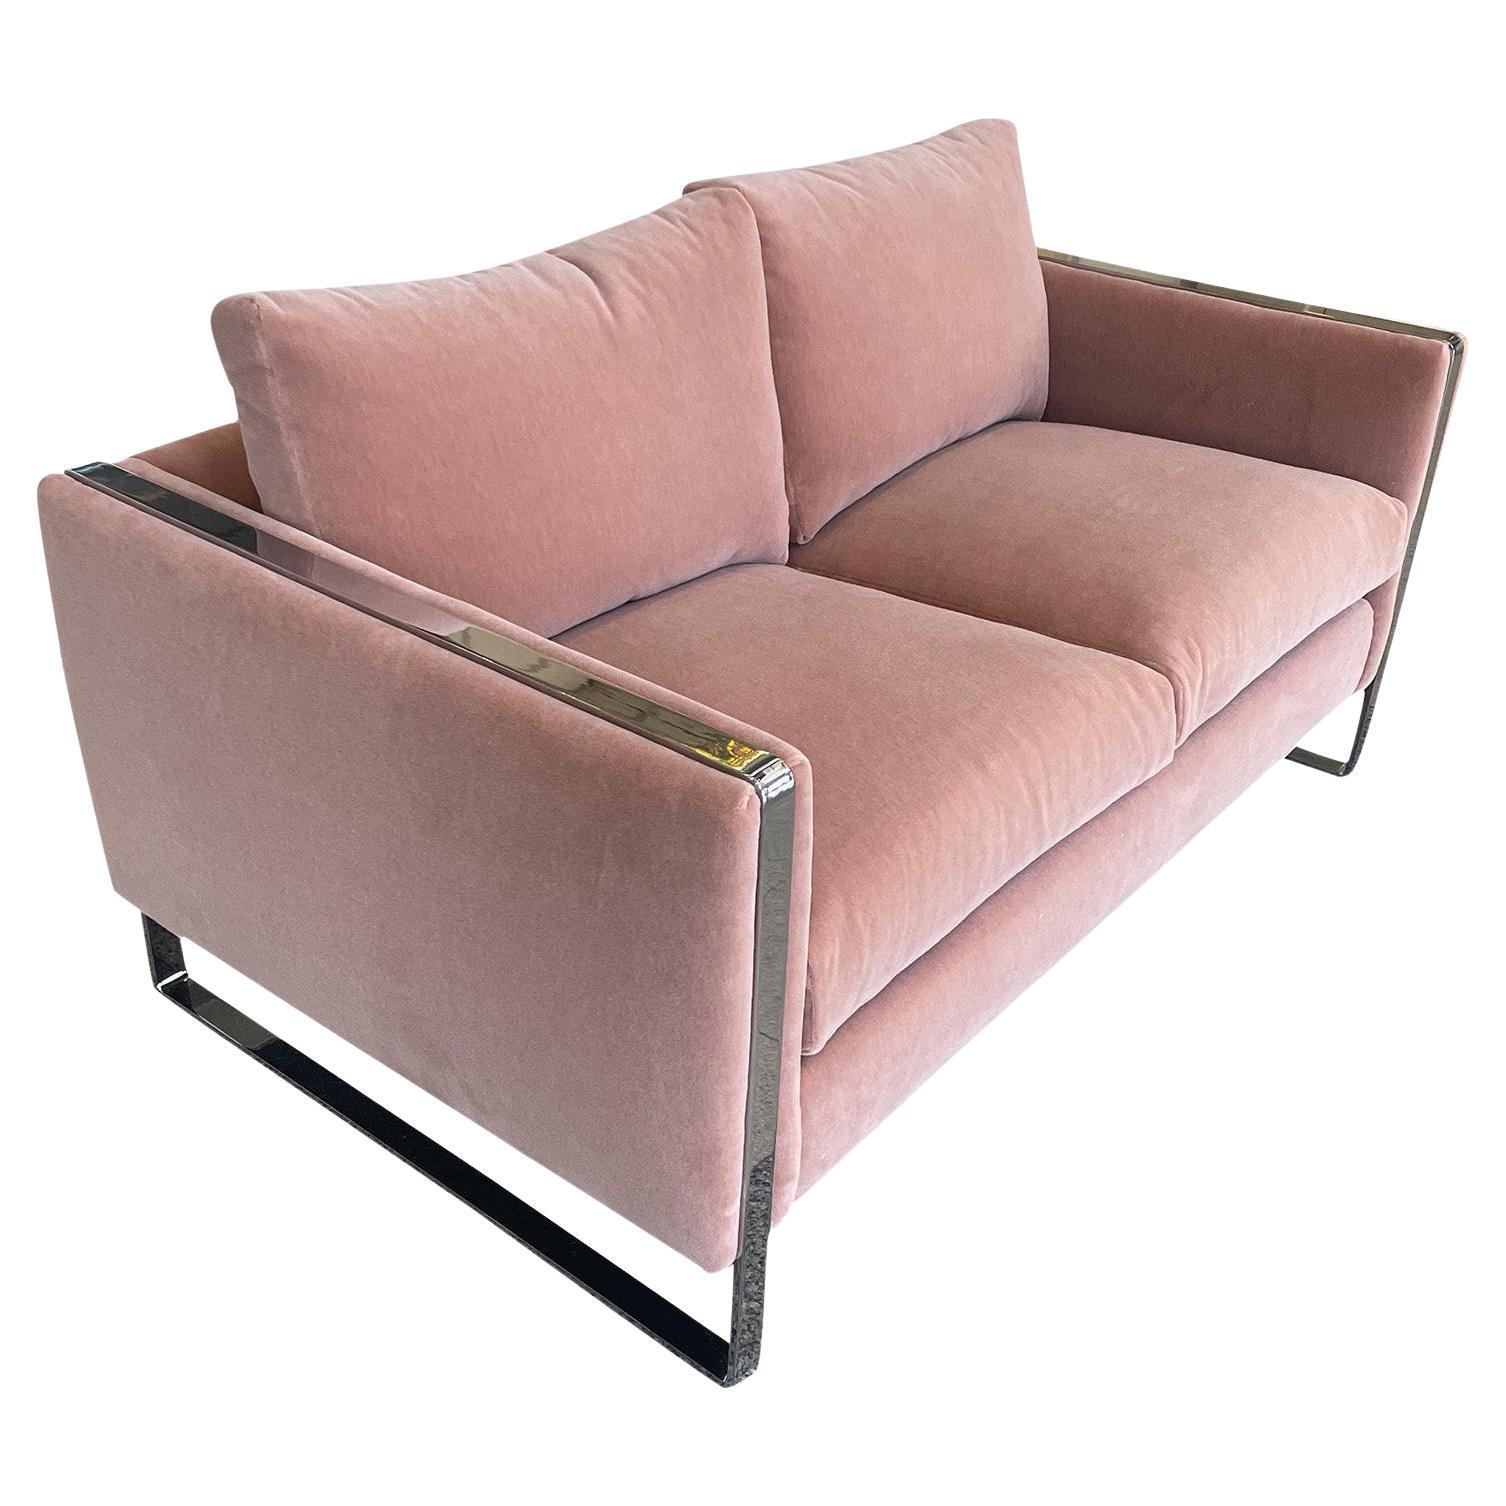 Midcentury Chrome Loveseat After Milo Baughman in Dusty Mauve Mohair For Sale